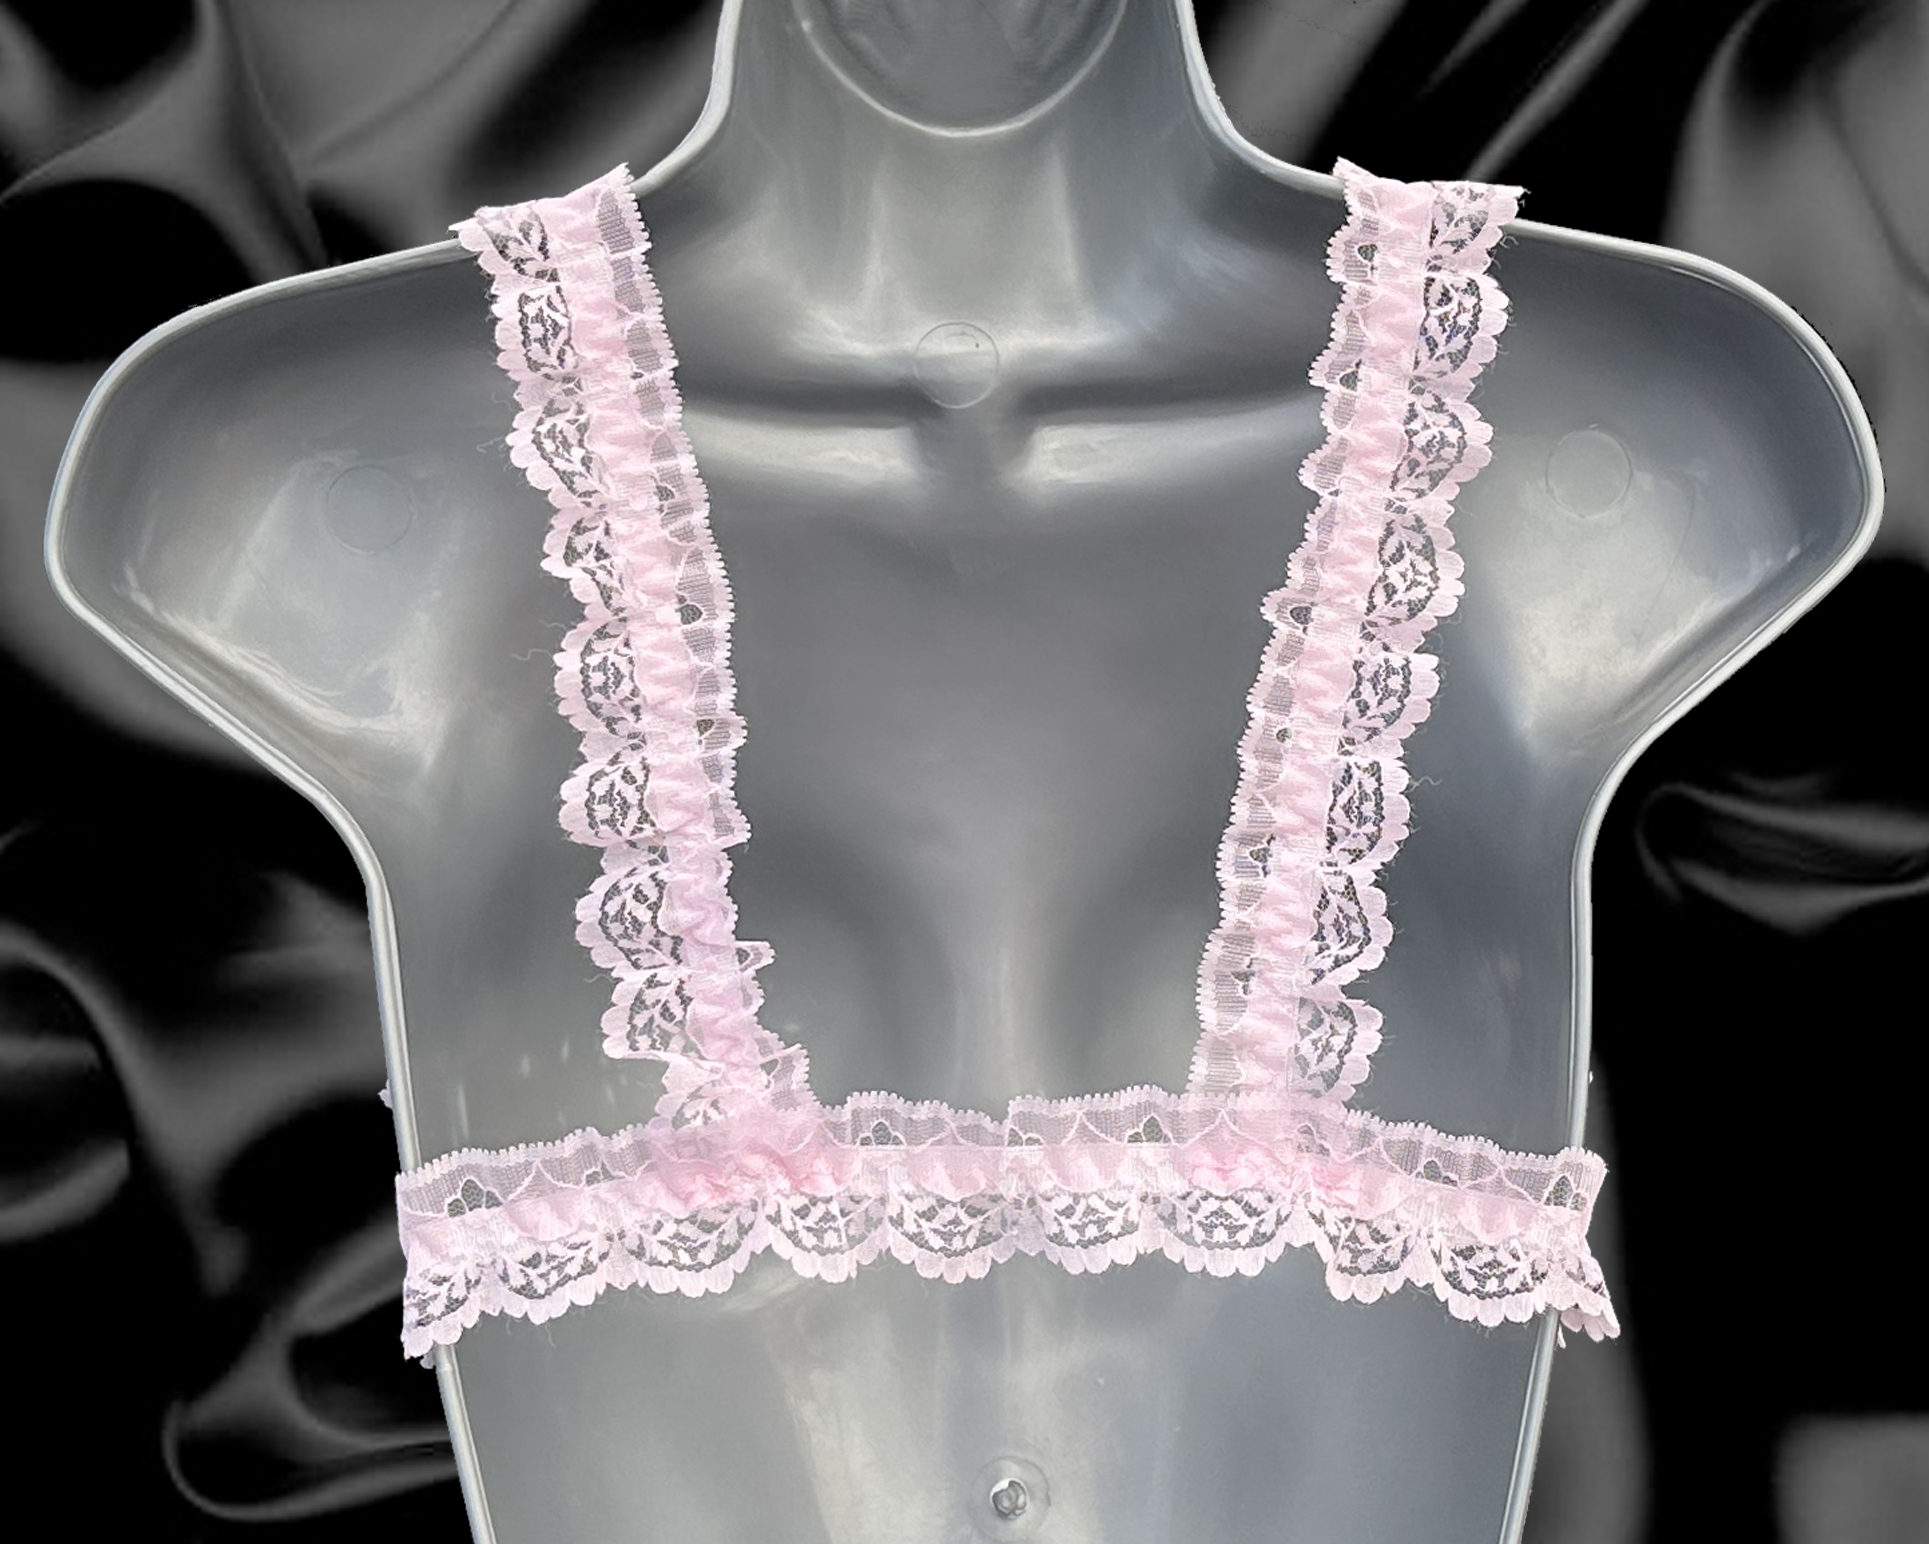 Sissy Satin Frilly Lacy Fitted Pull On Bra Bralette Roses Pearls Bows CD TV  DRAG 